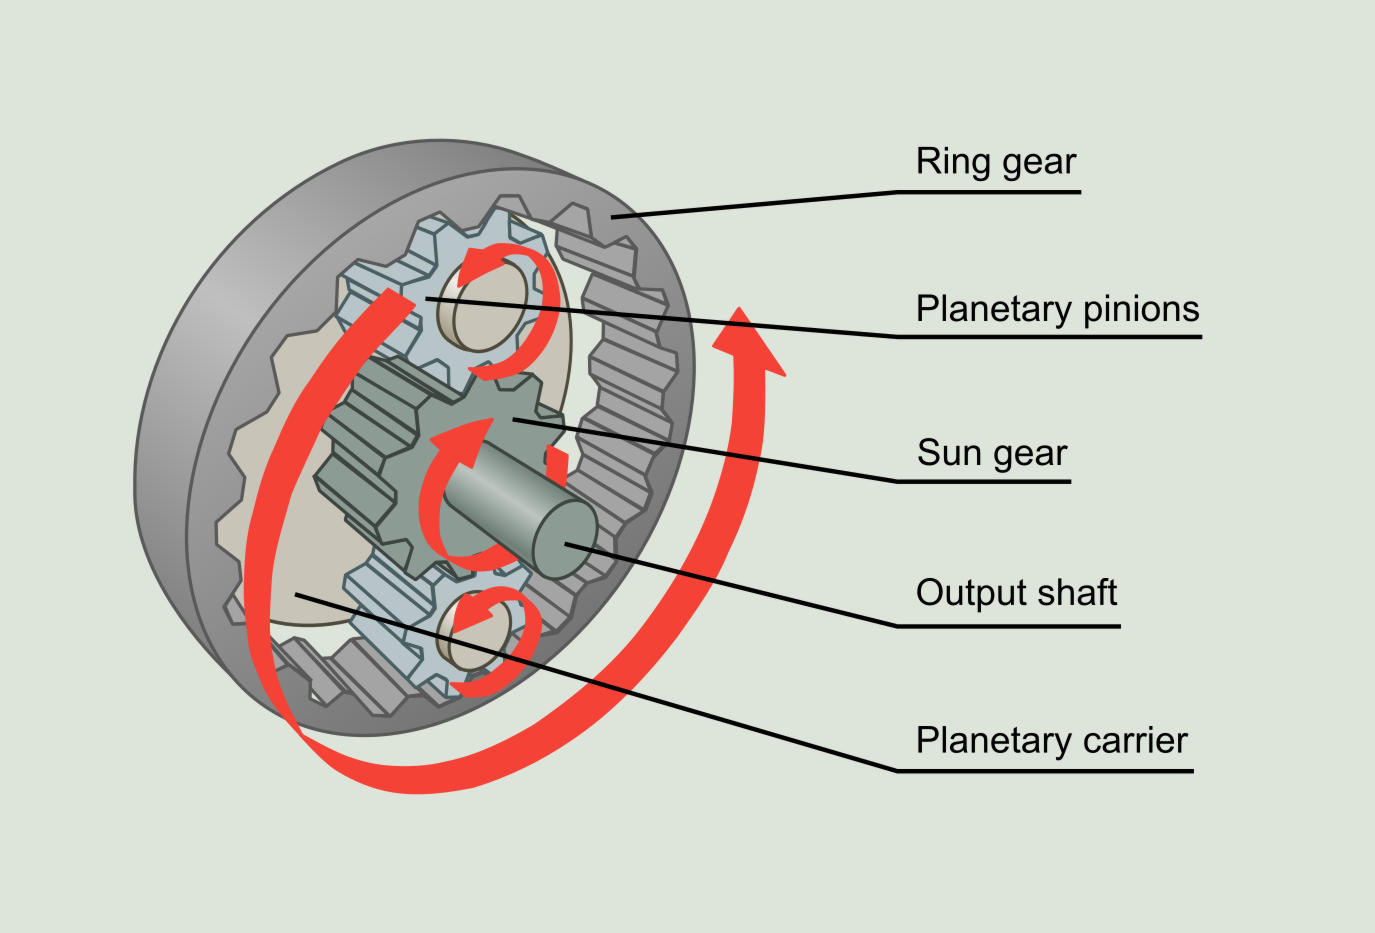 Figure 8.3: Components of a planetary gearbox